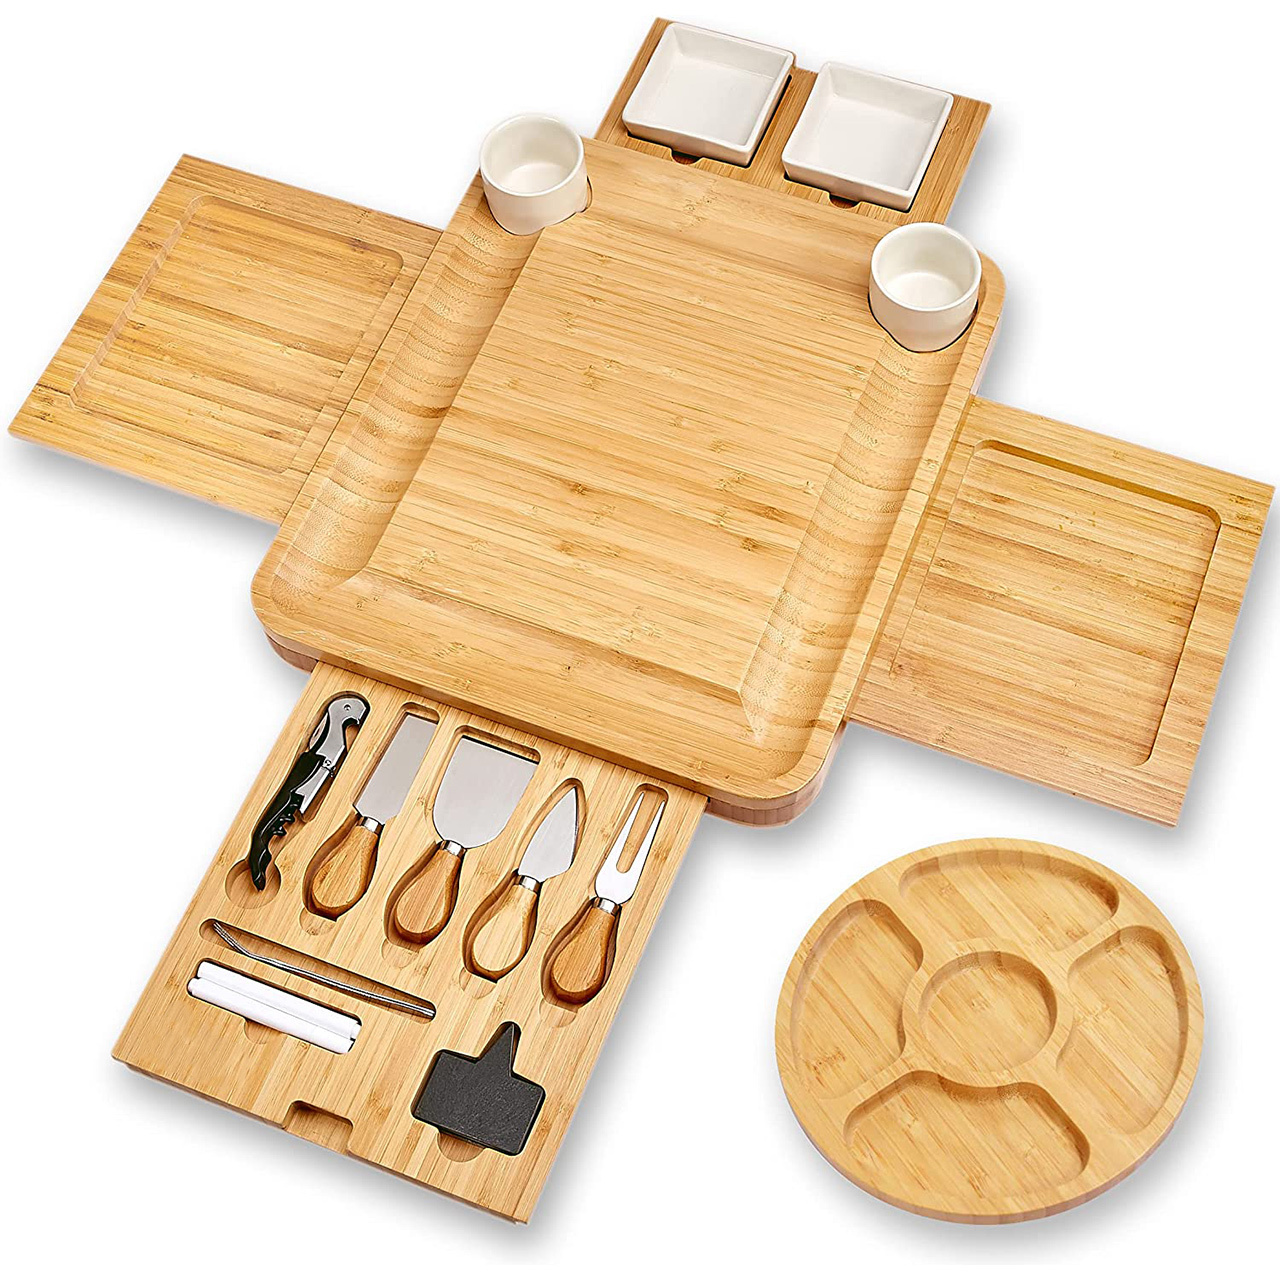 🔥Only $24.99 today🔥 Multifunctional cheese board🎁BUY 2 FREE SHIPPING🎁